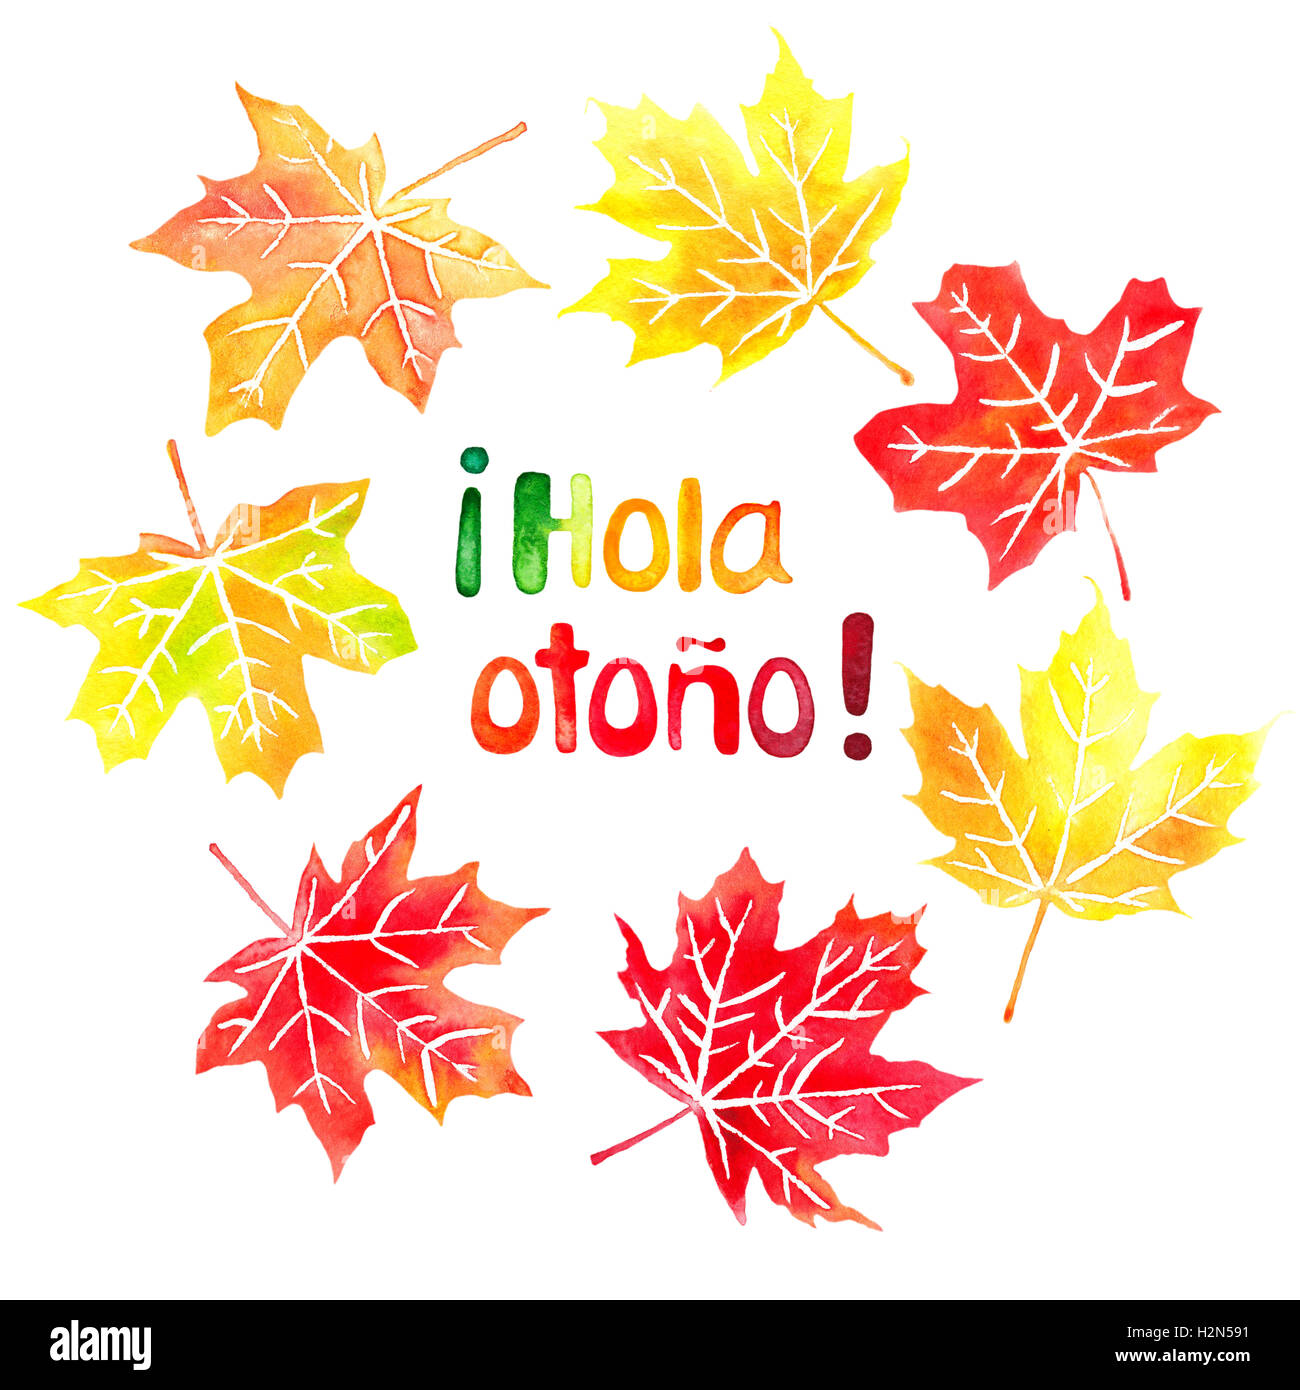 Hola otono meaning 'Hello autumn' in spanish watercolor hand drawn lettering and fall colored maple leaves Stock Photo